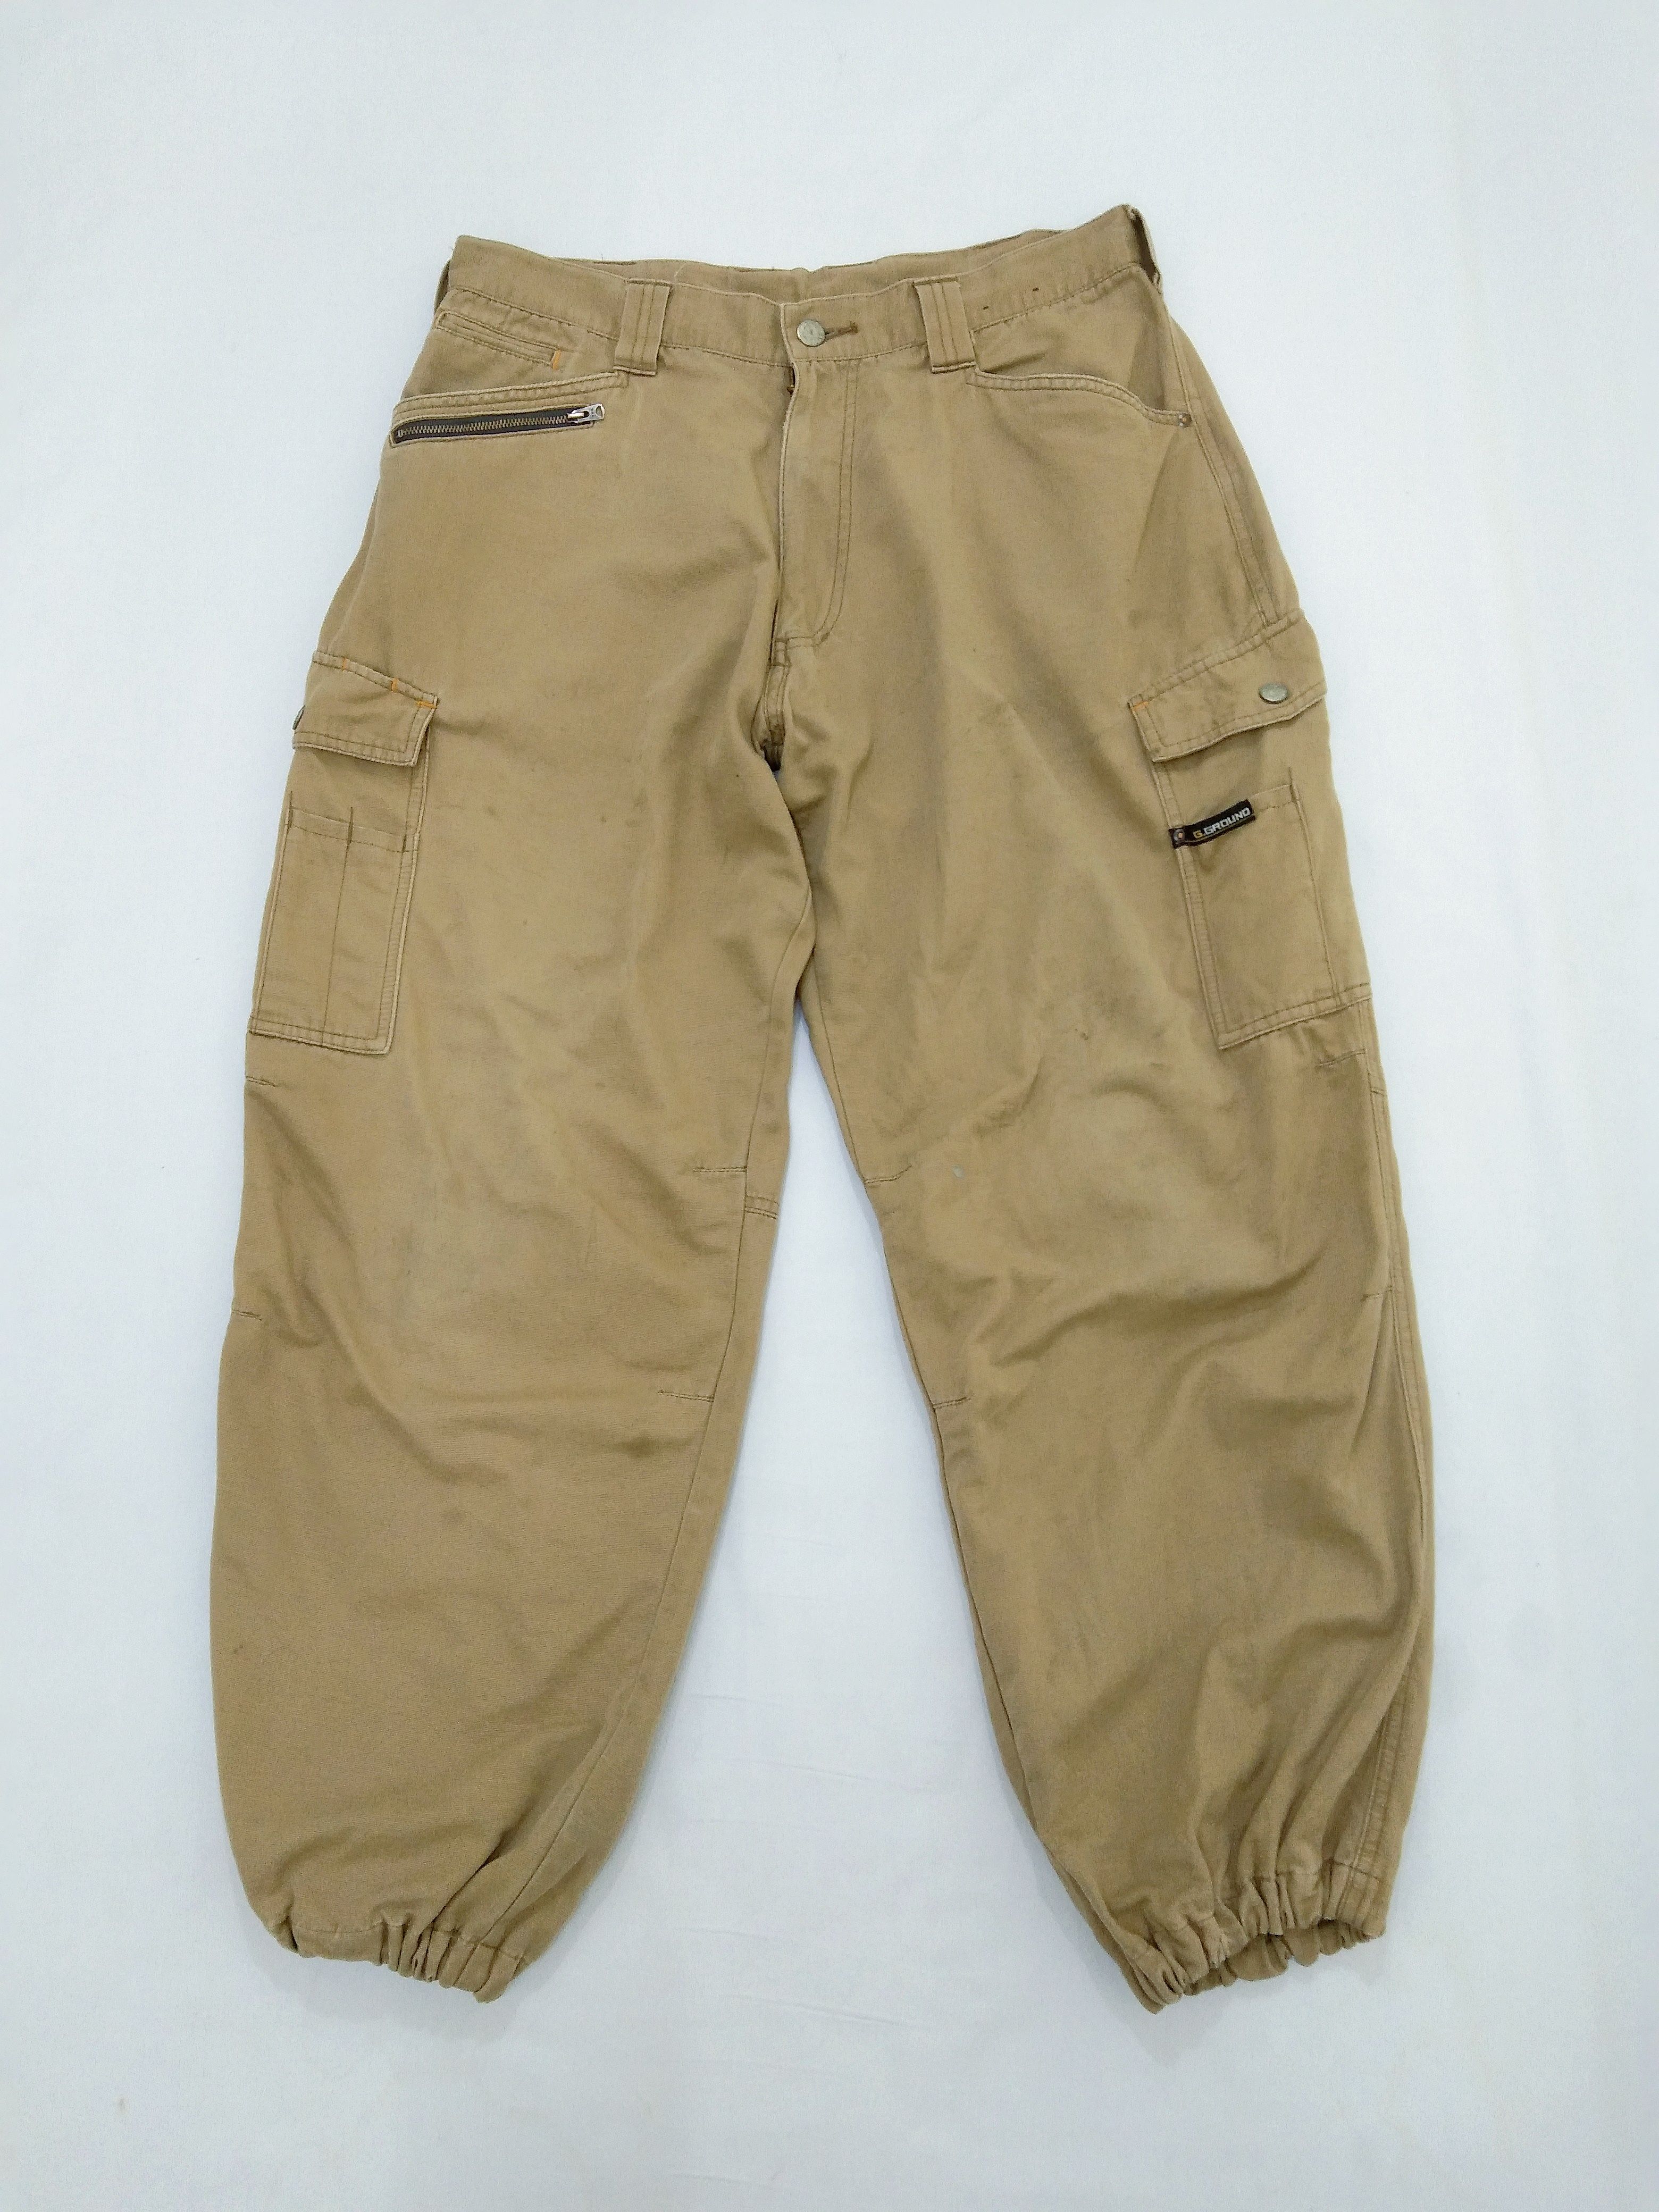 Vintage Vintage Baggy Jnco Style Cargo Pants | Grailed